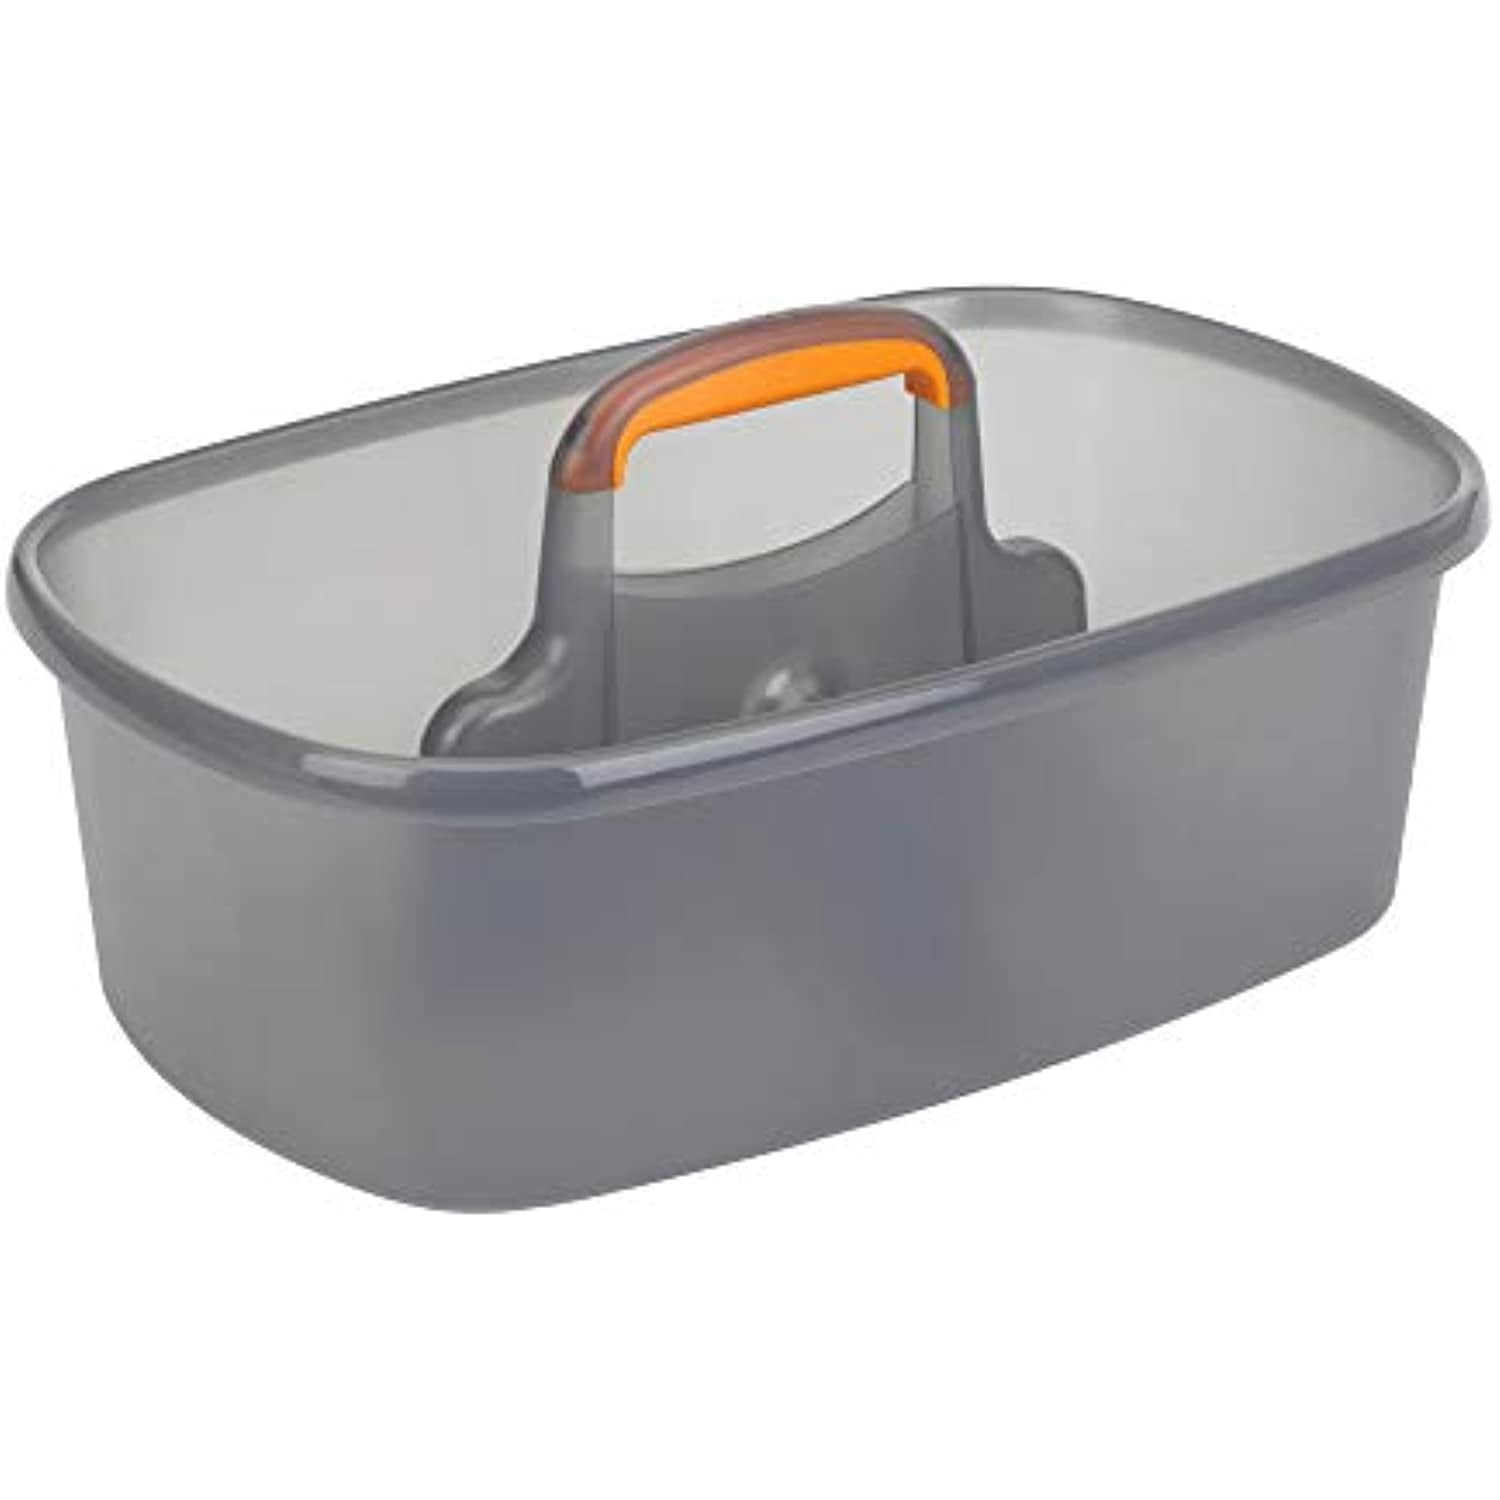 Casabella Plastic Multipurpose Cleaning Storage Caddy with Handle, 1.85 Gallon, Gray and Orange, Size: 25